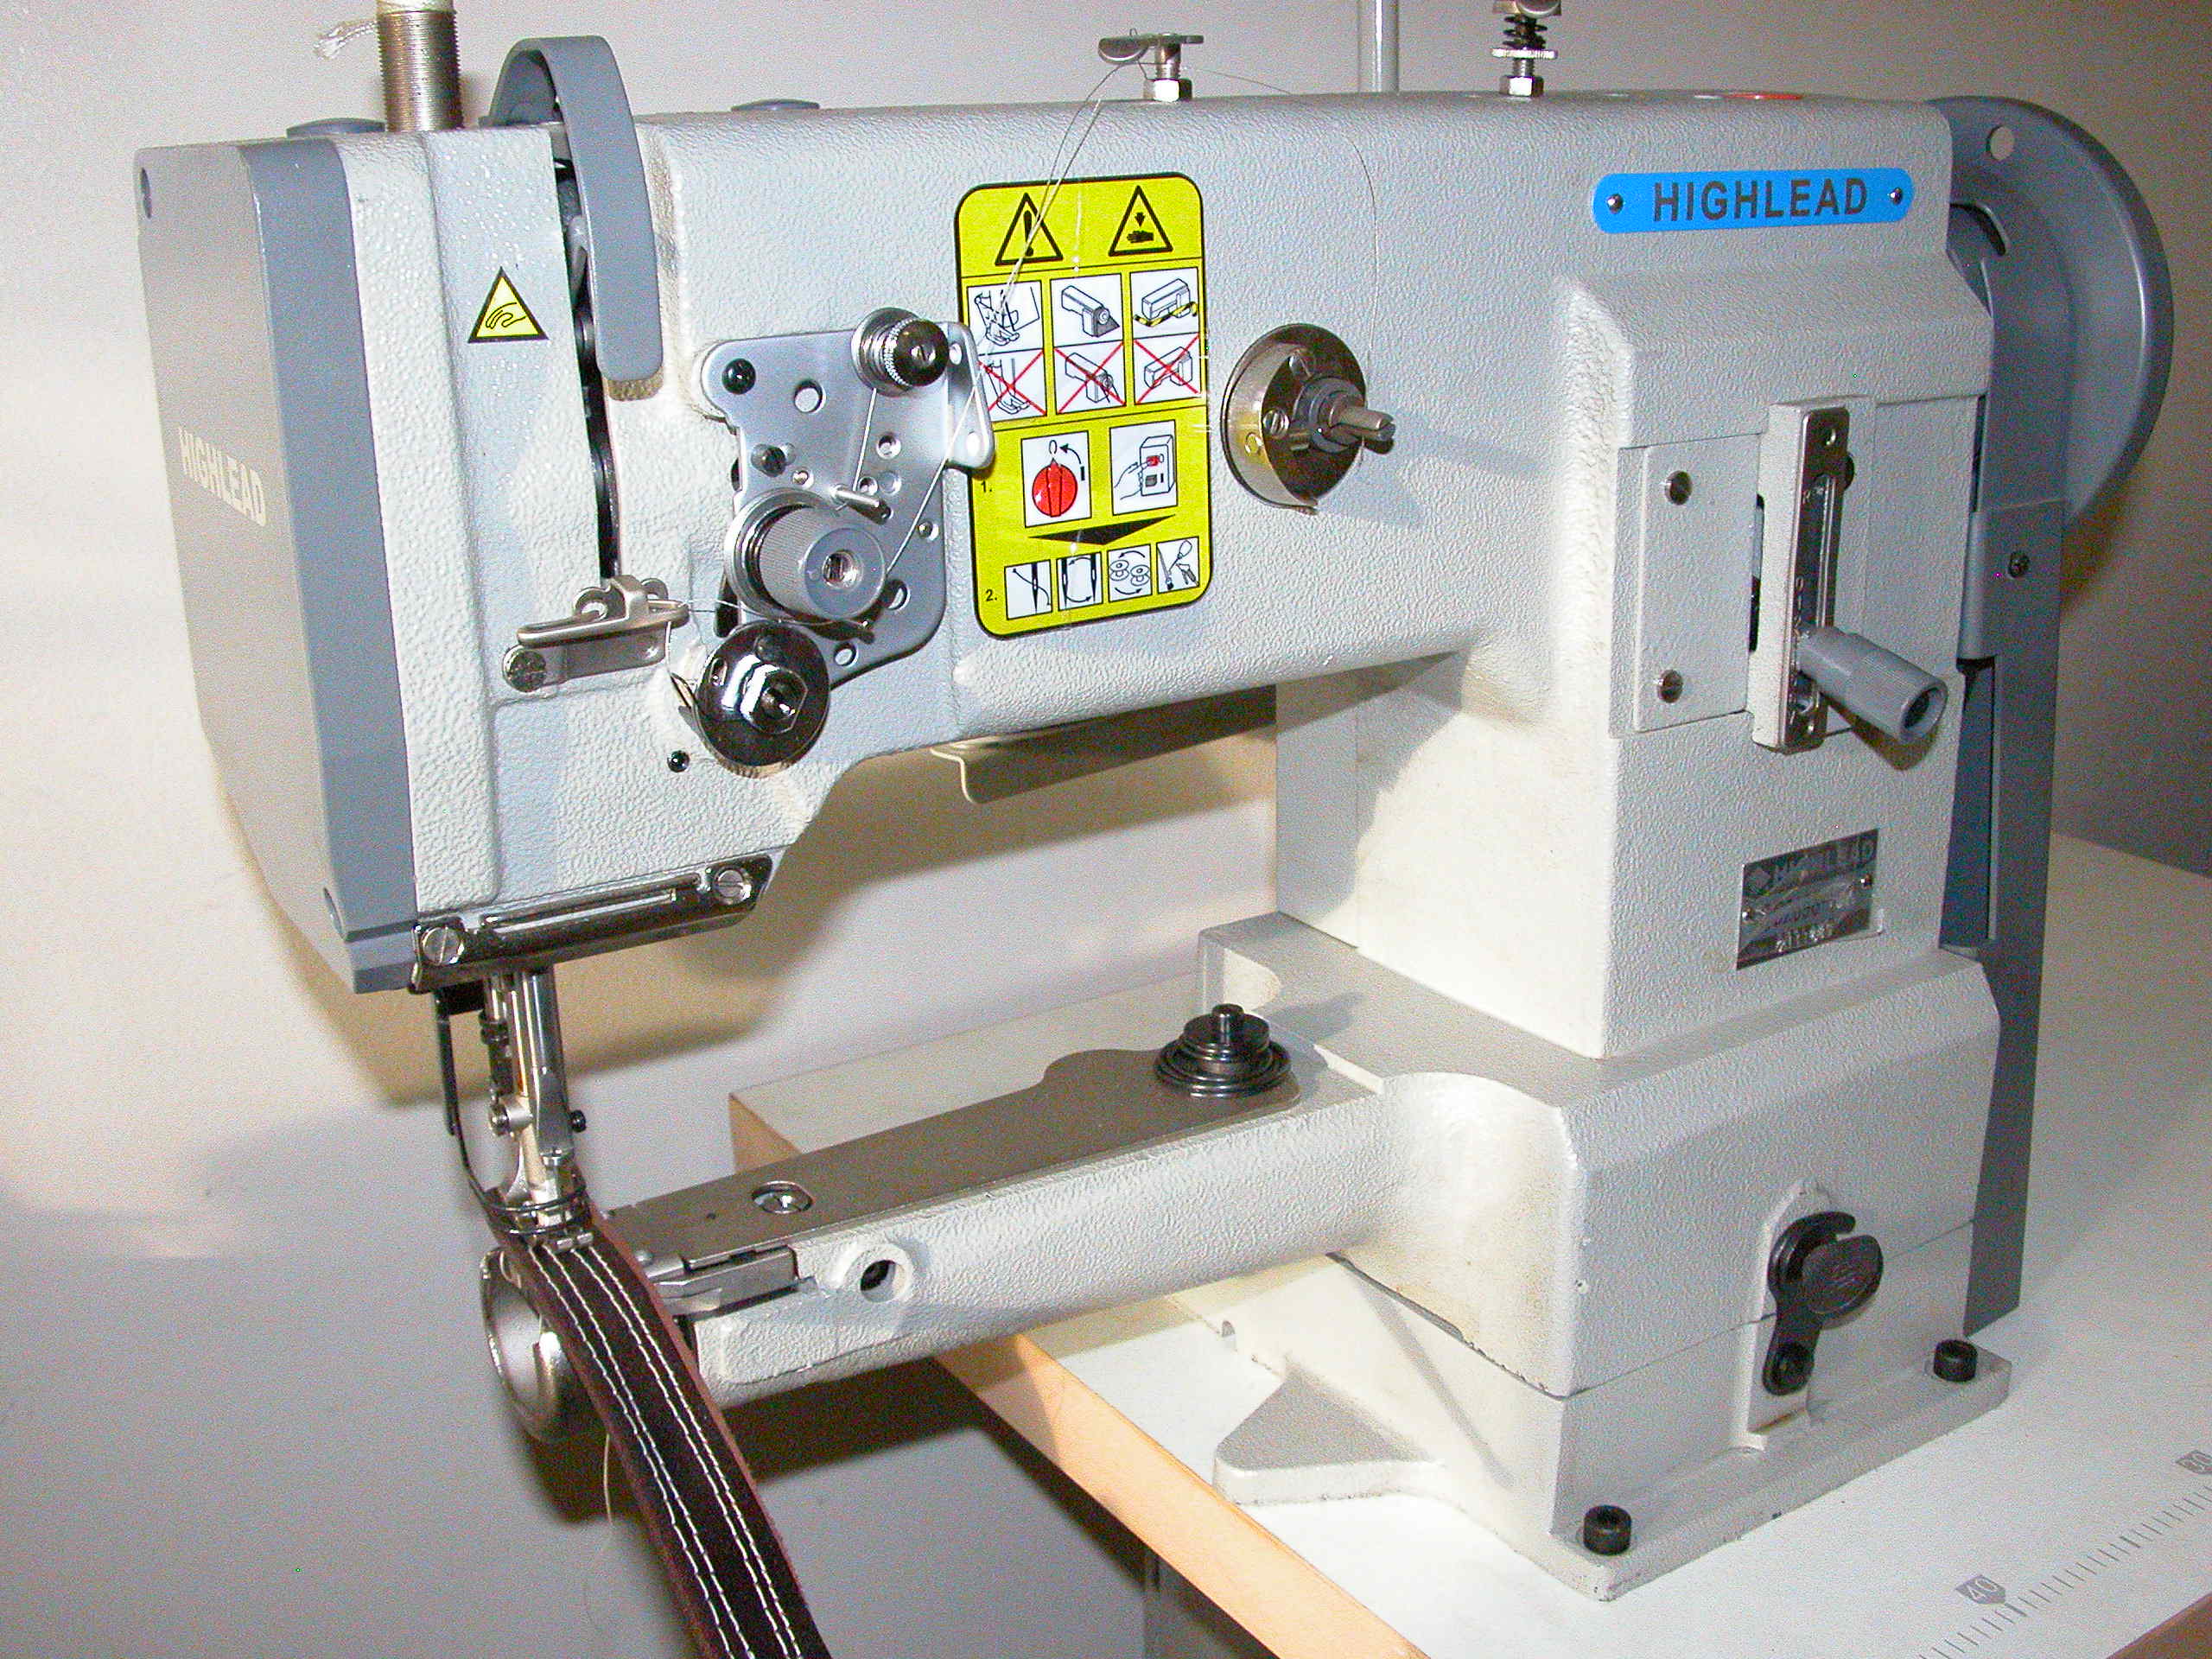 Highlead GC2698 Sewing Machine